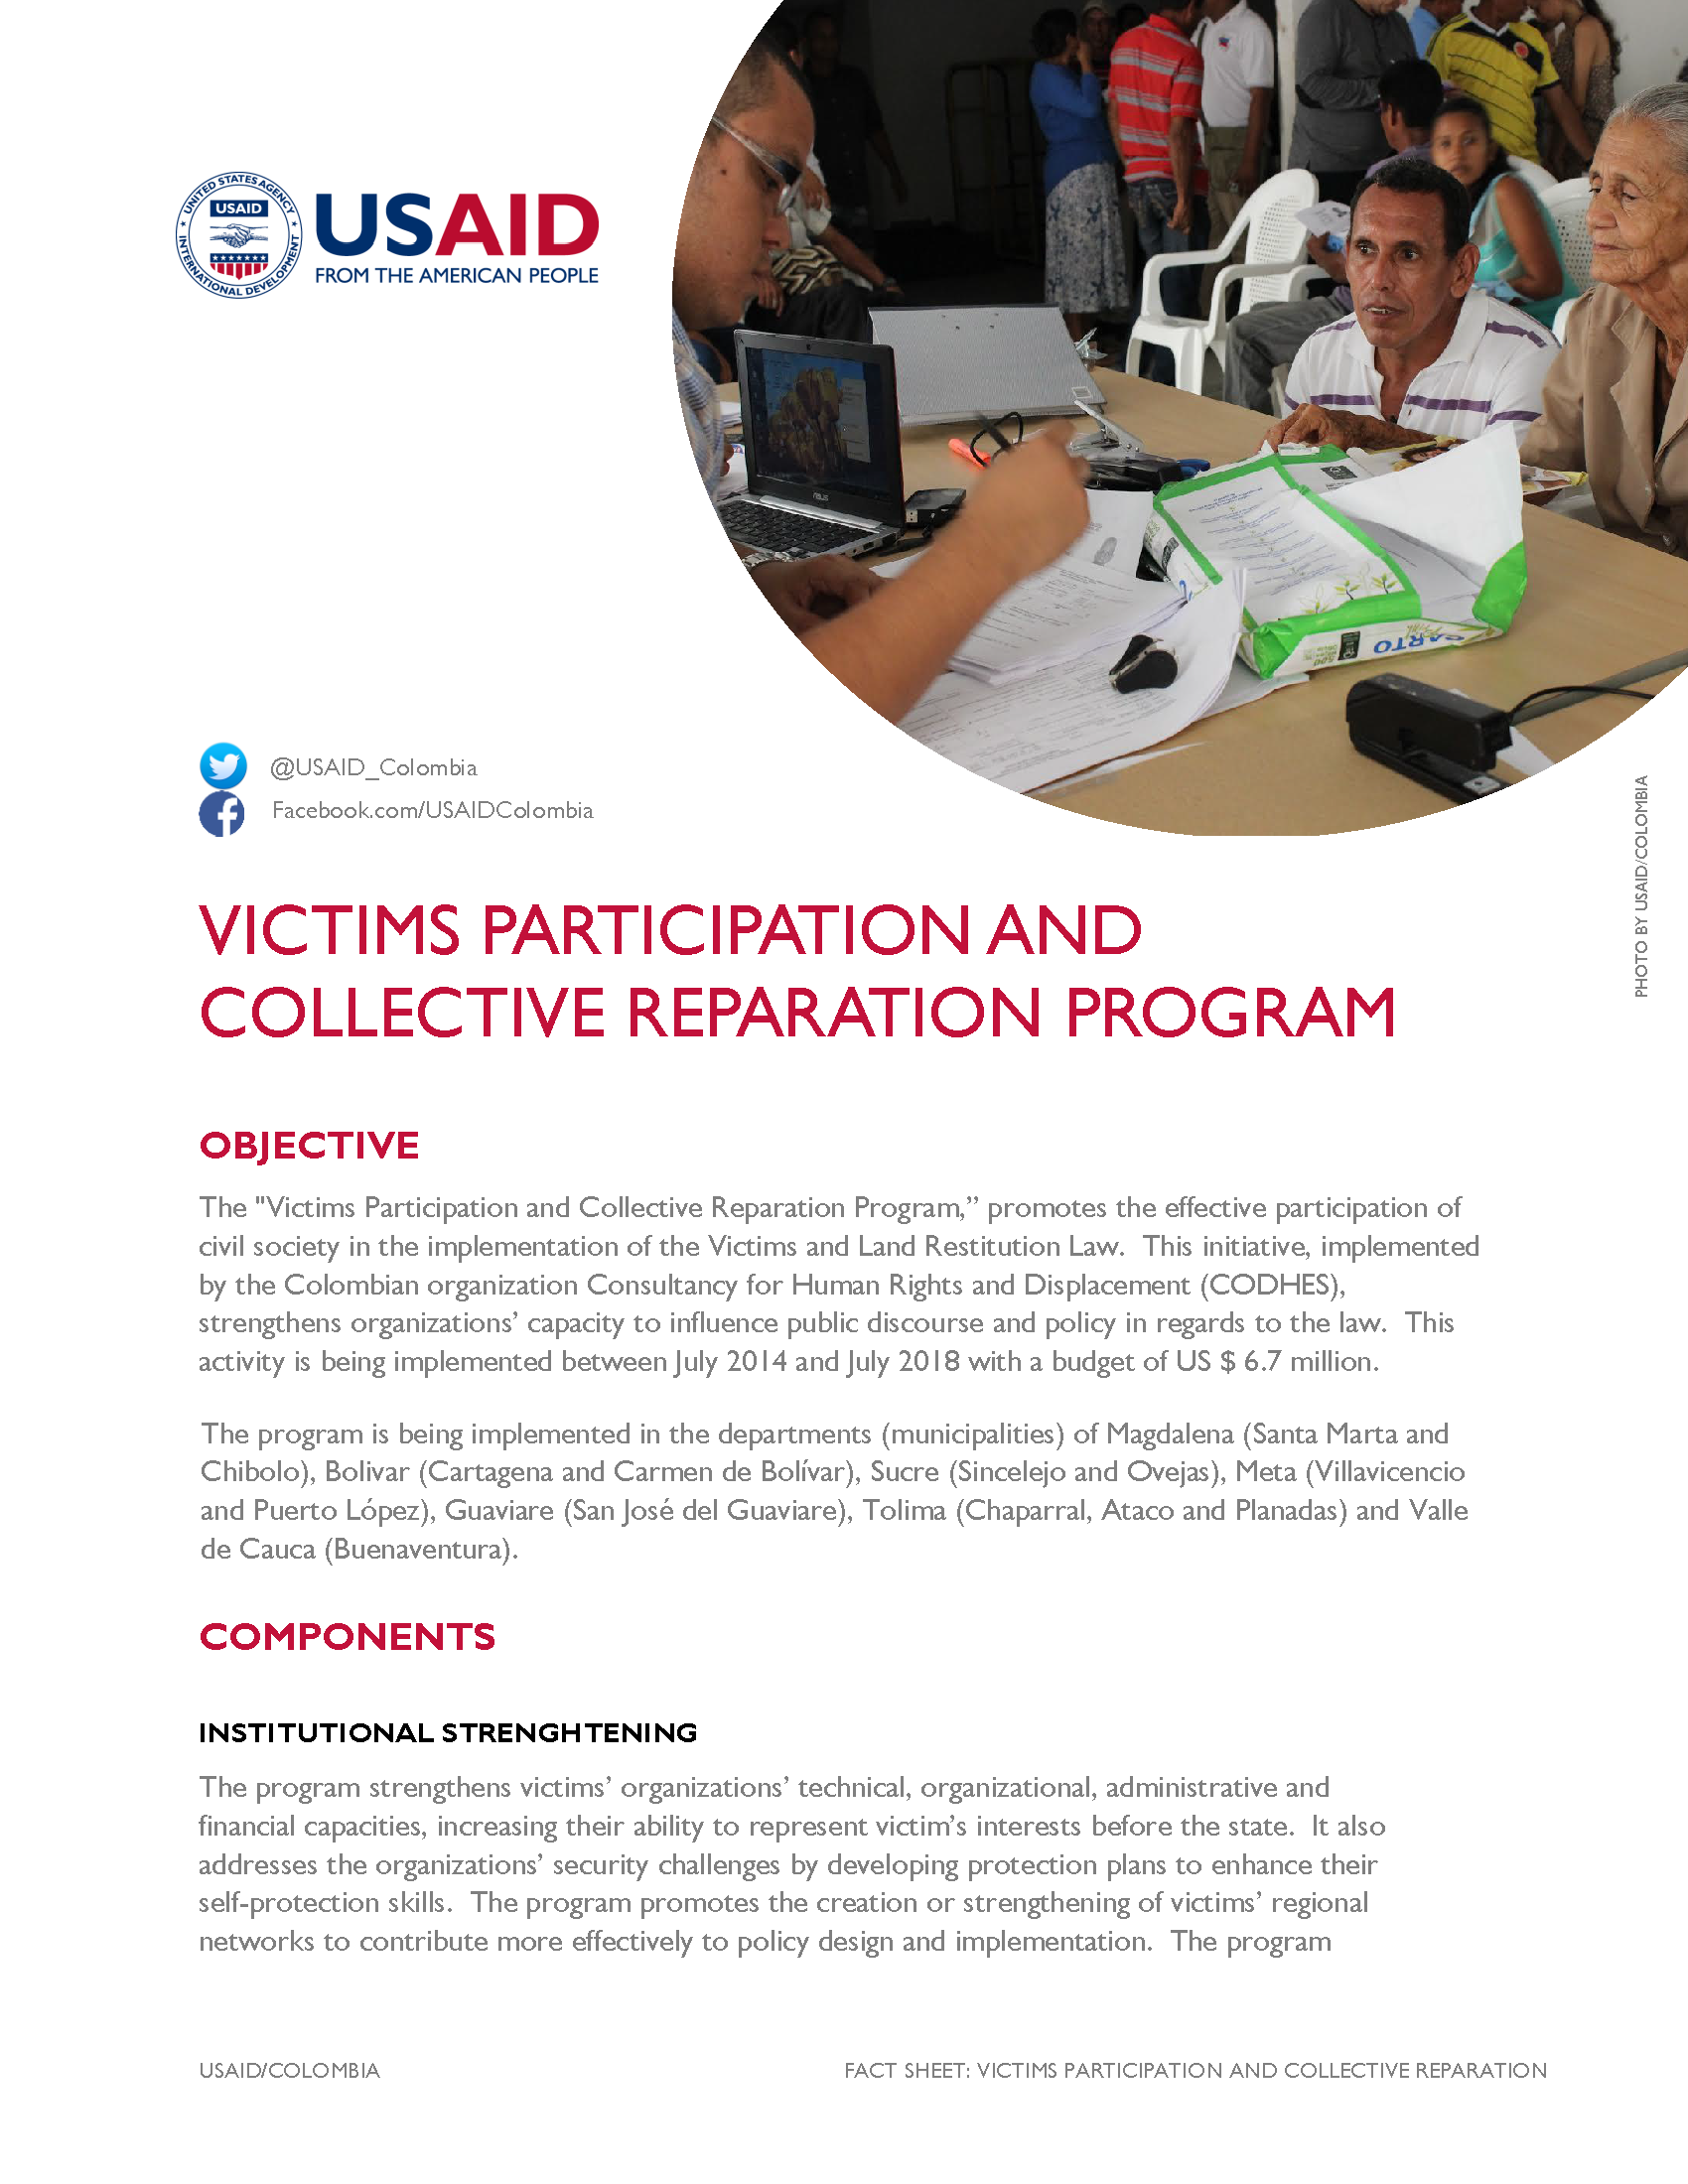 Victims Participation and Collective Reparation Program